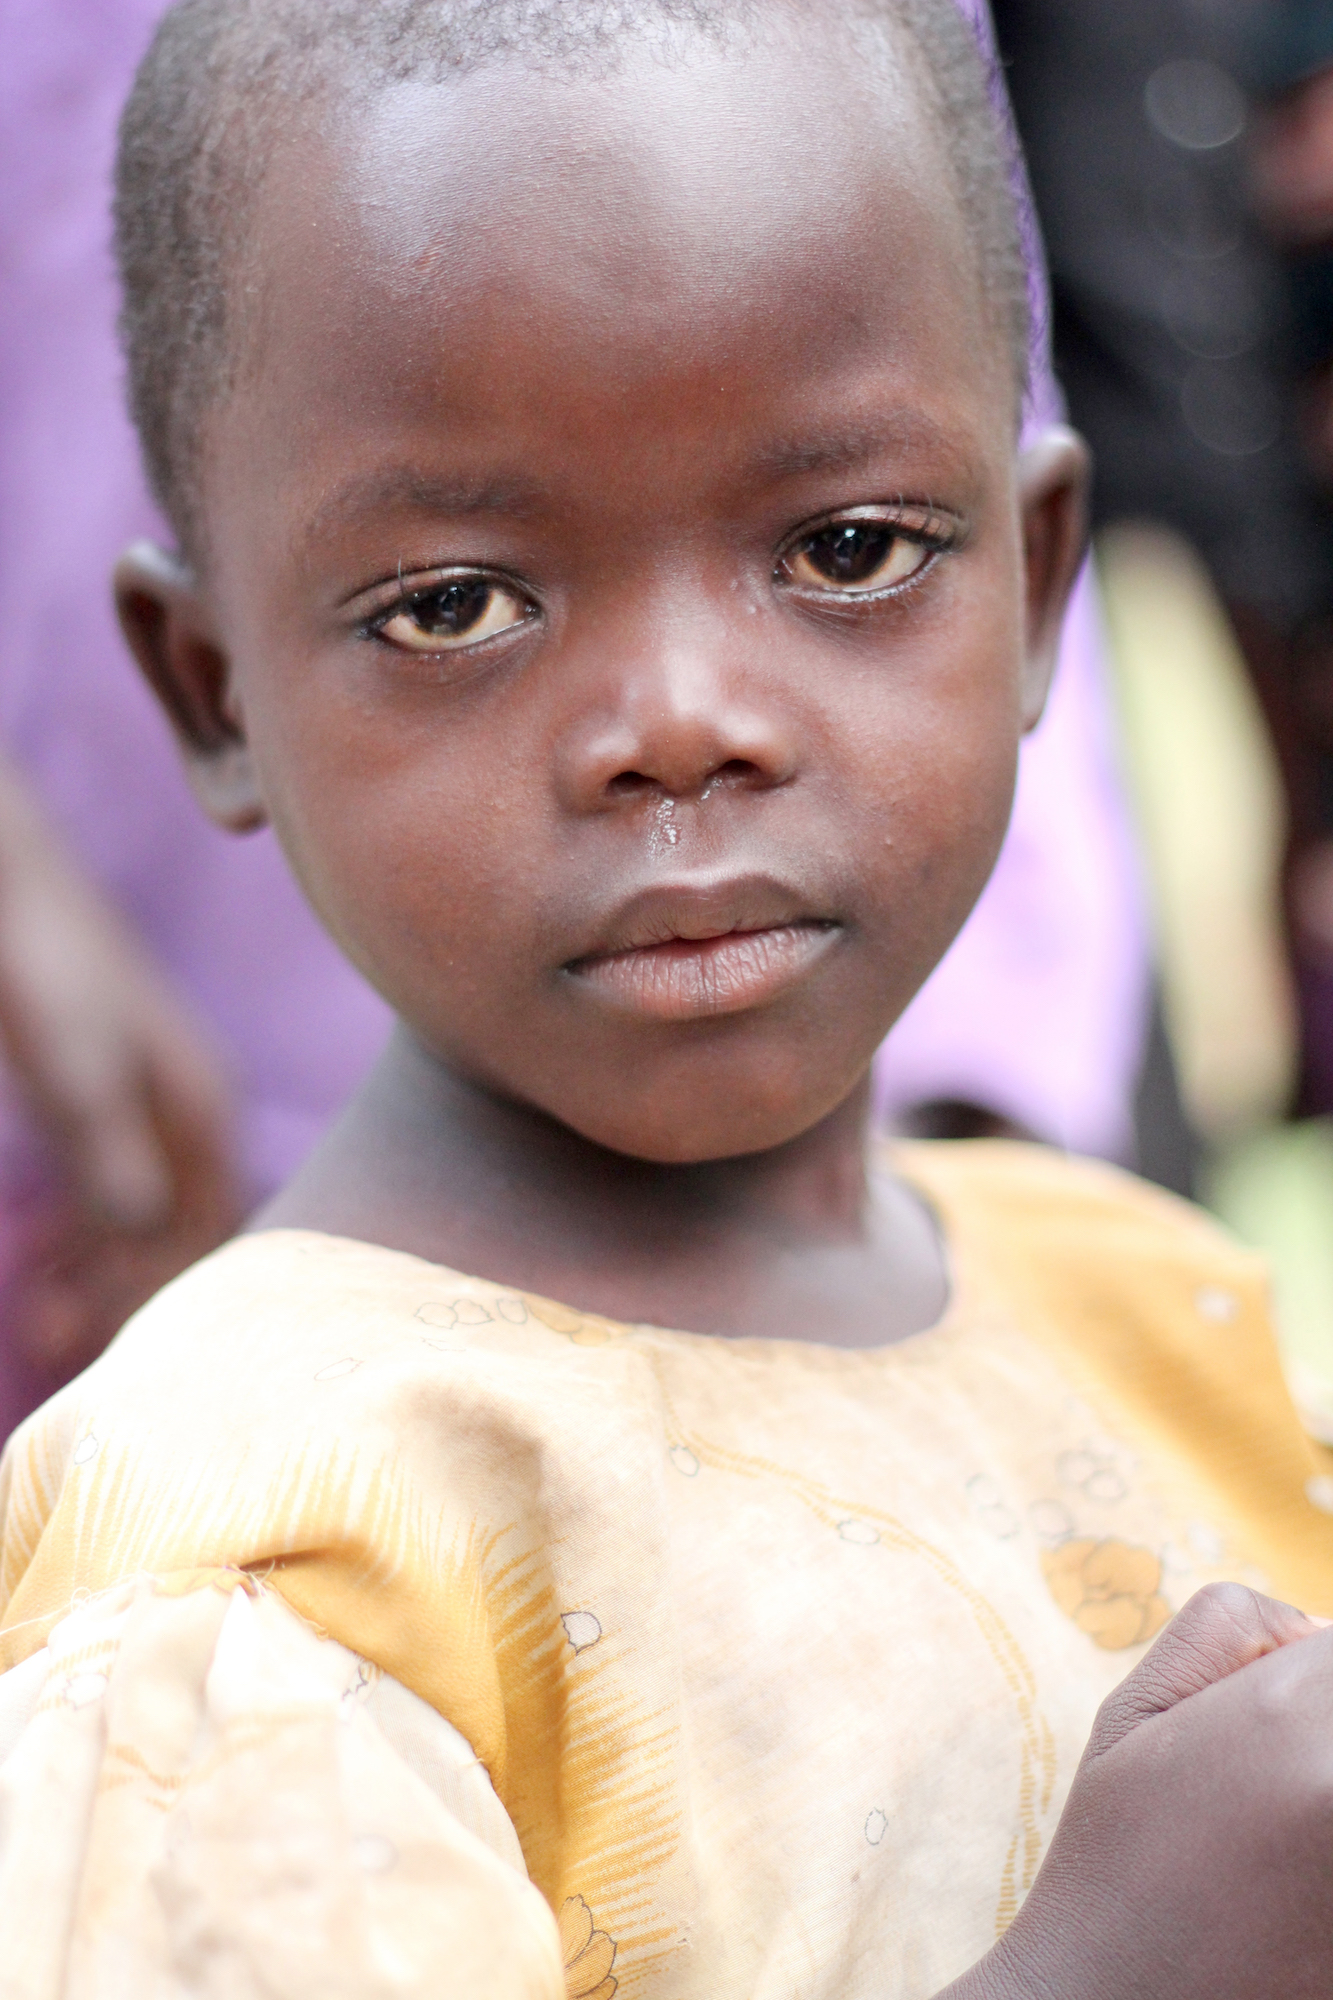 Close up of a young child